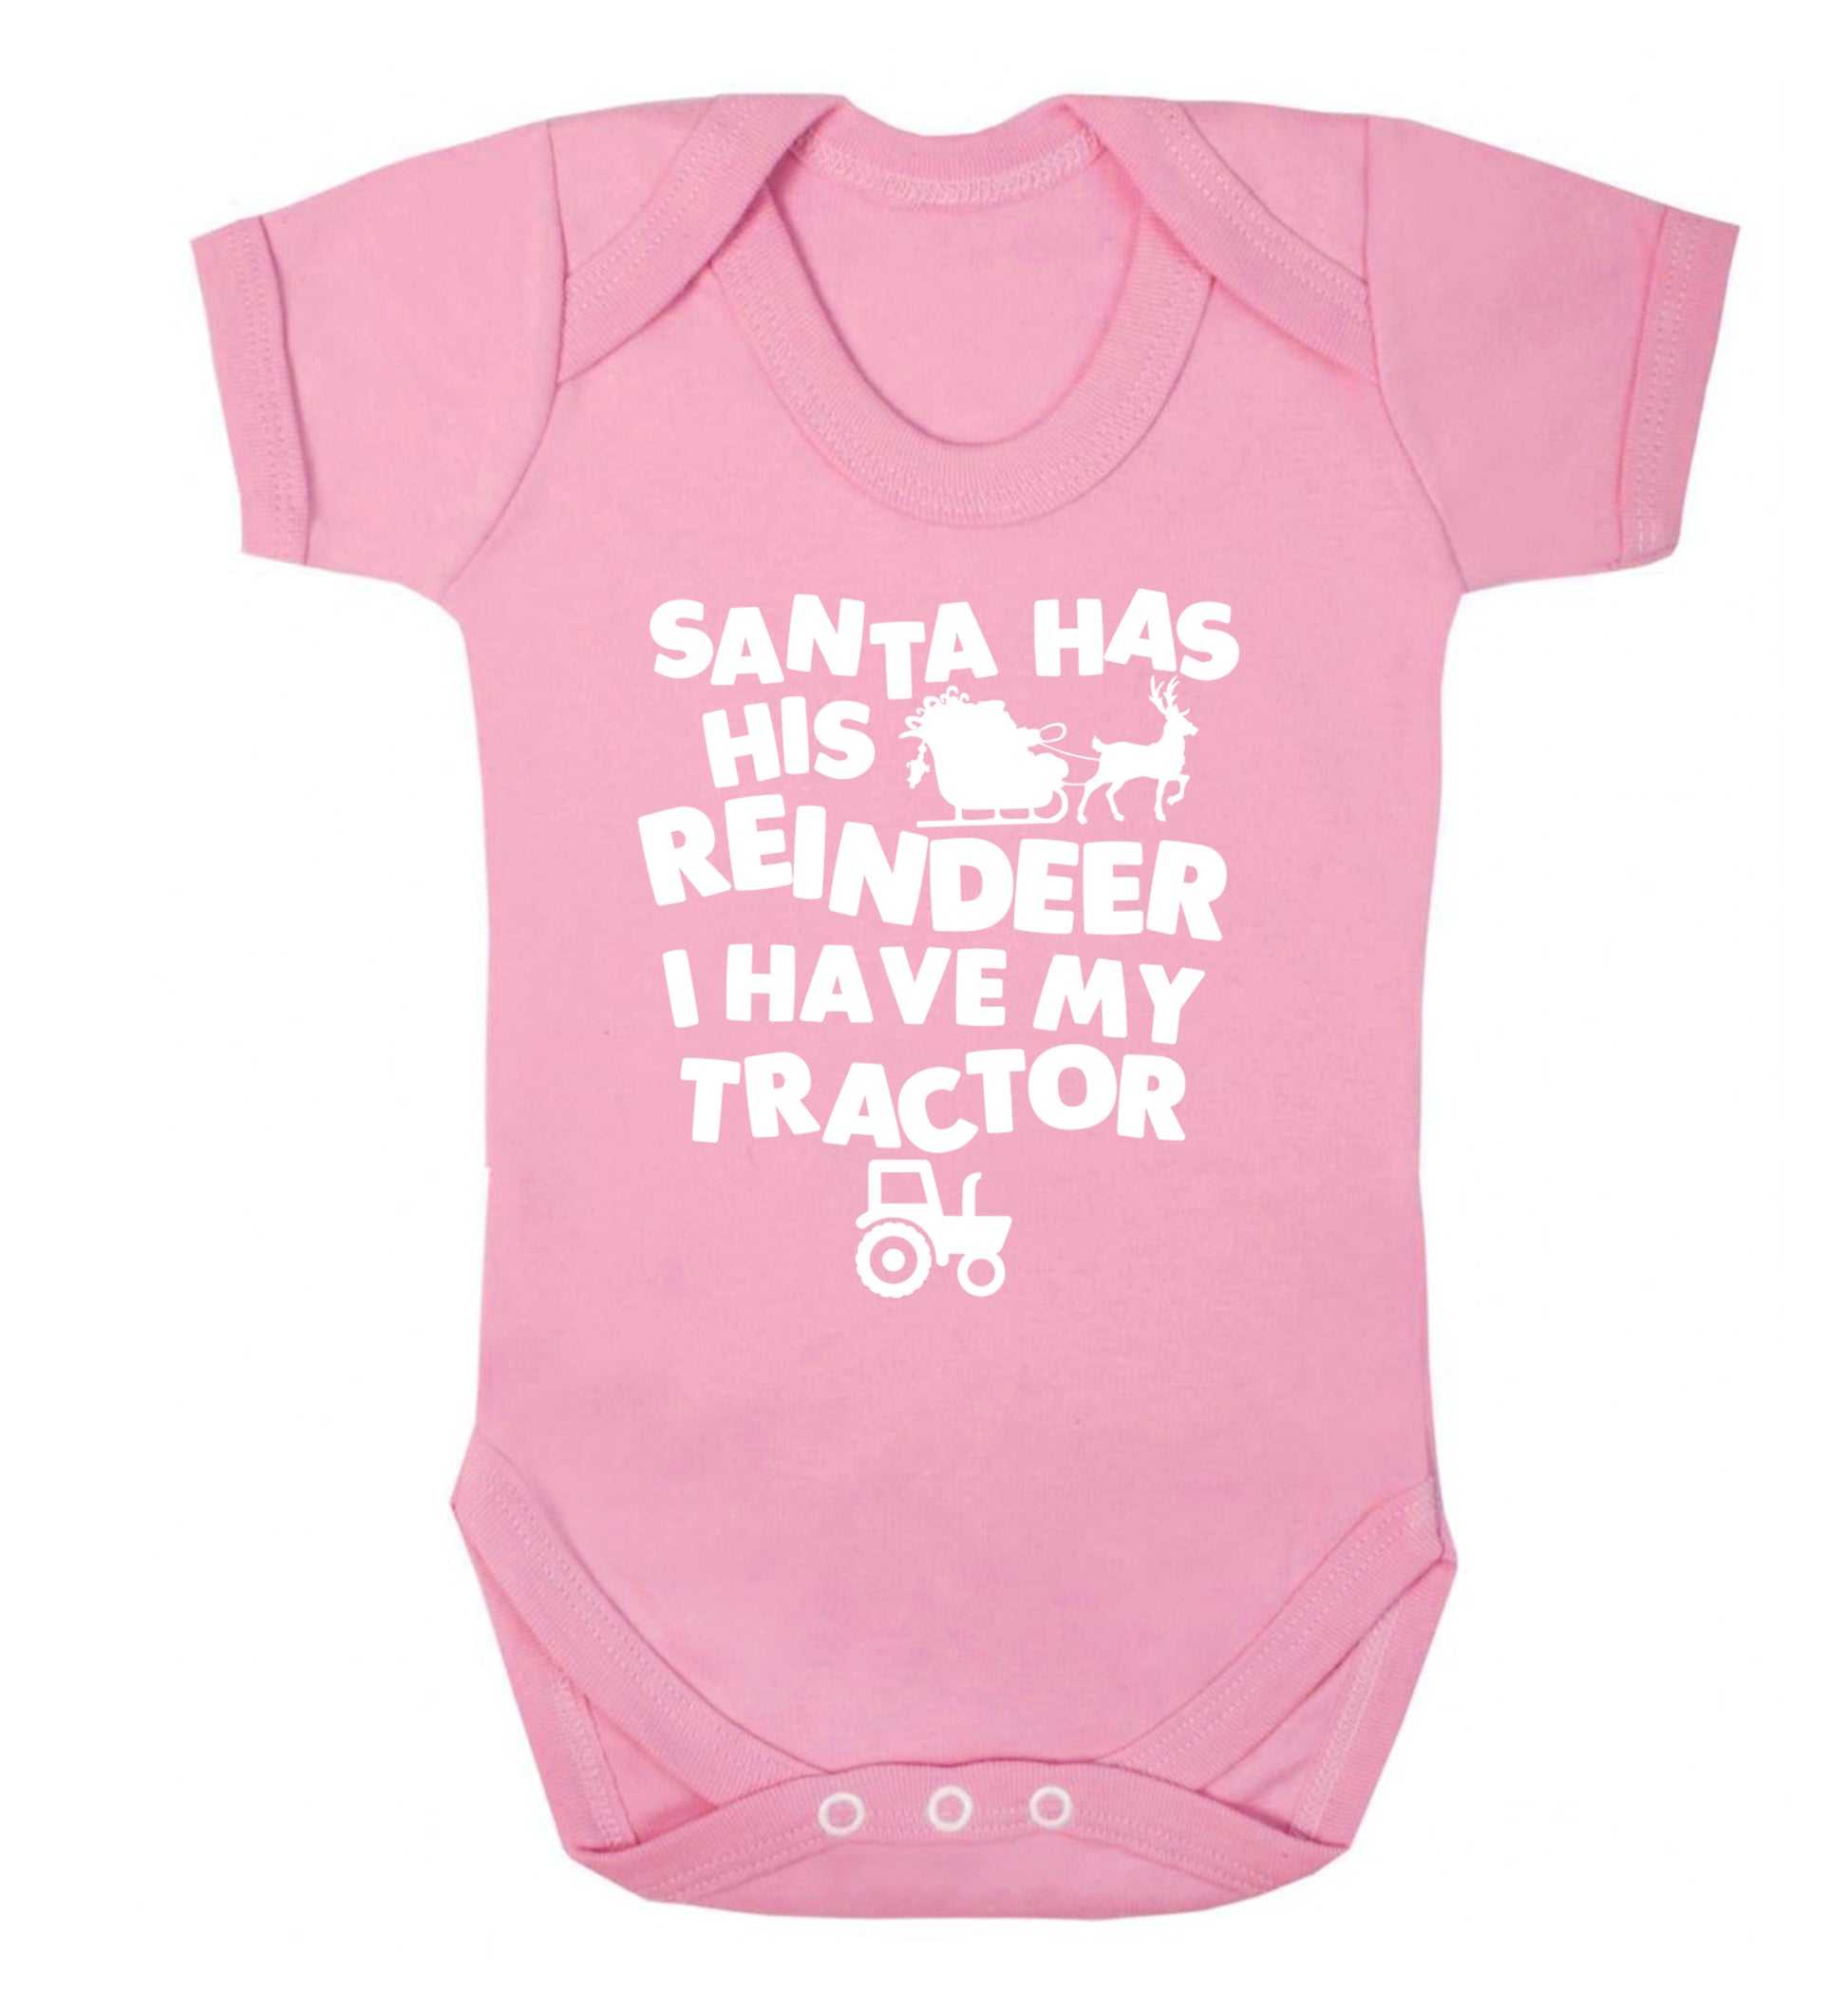 Santa has his reindeer I have my tractor Baby Vest pale pink 18-24 months